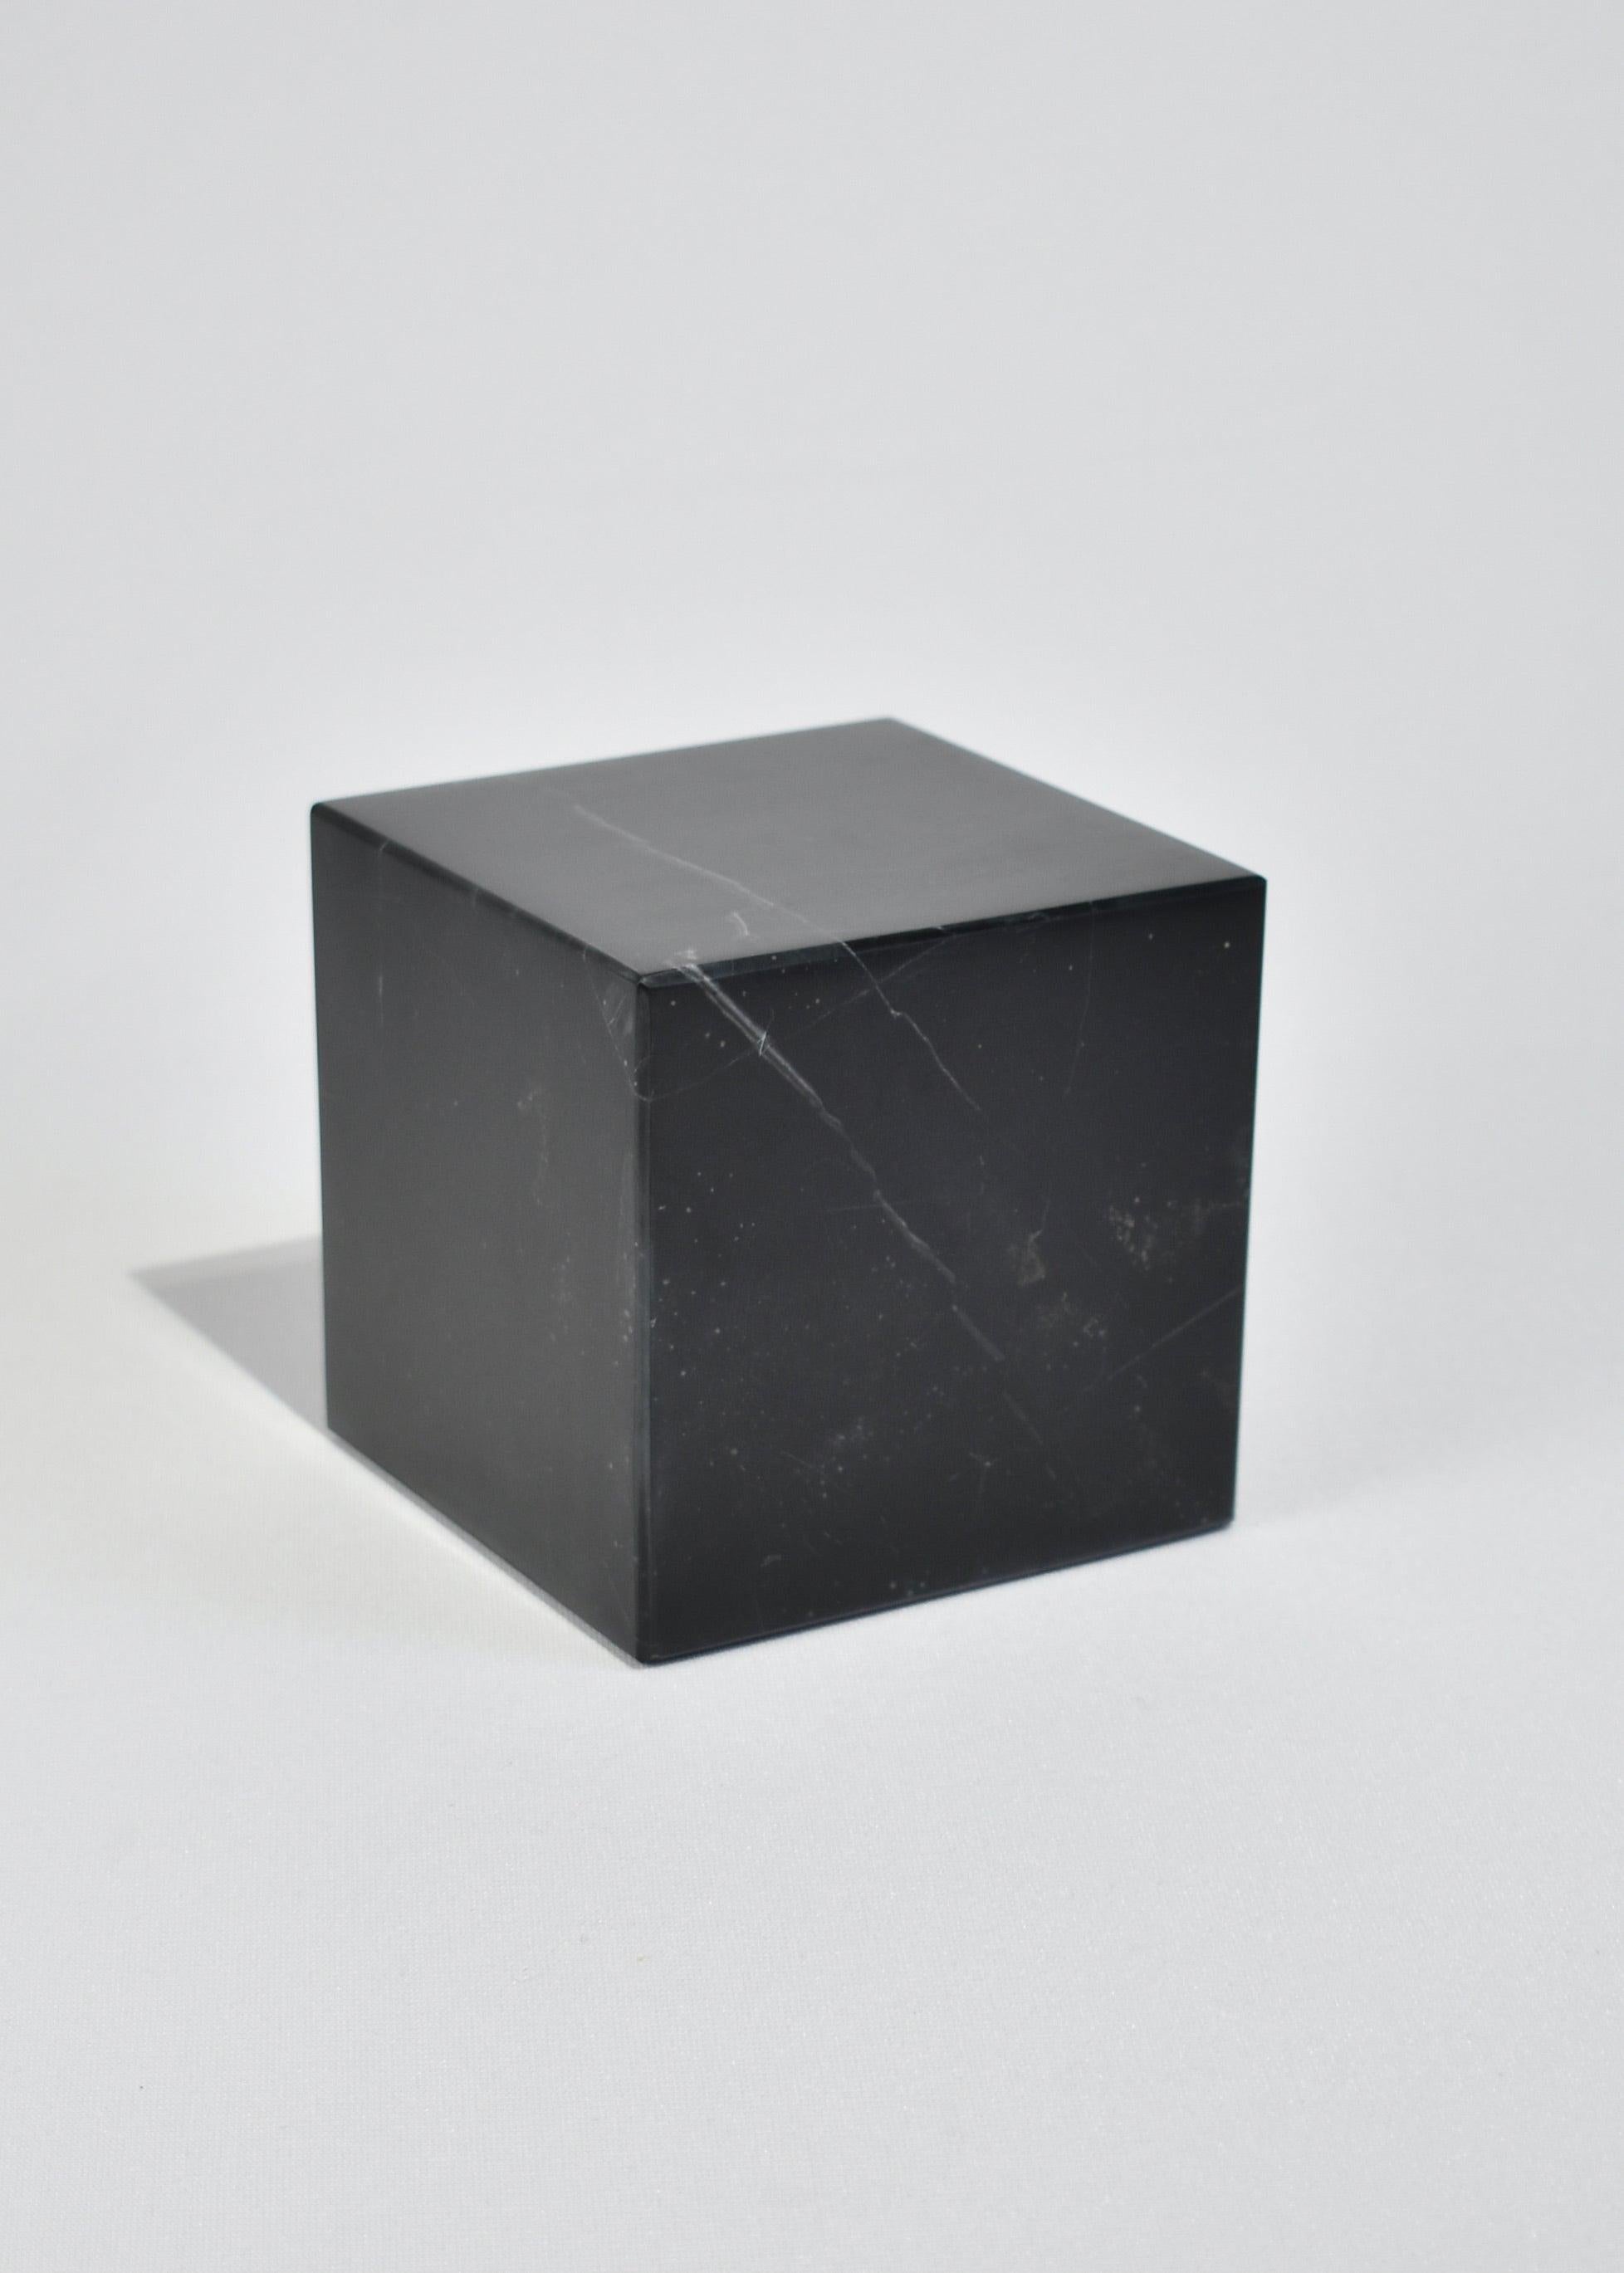 The cube bookend by Casa Shop, part of our stone collection handmade by artisans in Perú. Featuring hand-carved shapes in Black Onyx, Red Jasper, and Green Serpentine. Sold individually with the intention of mixing colors and shapes to make your set